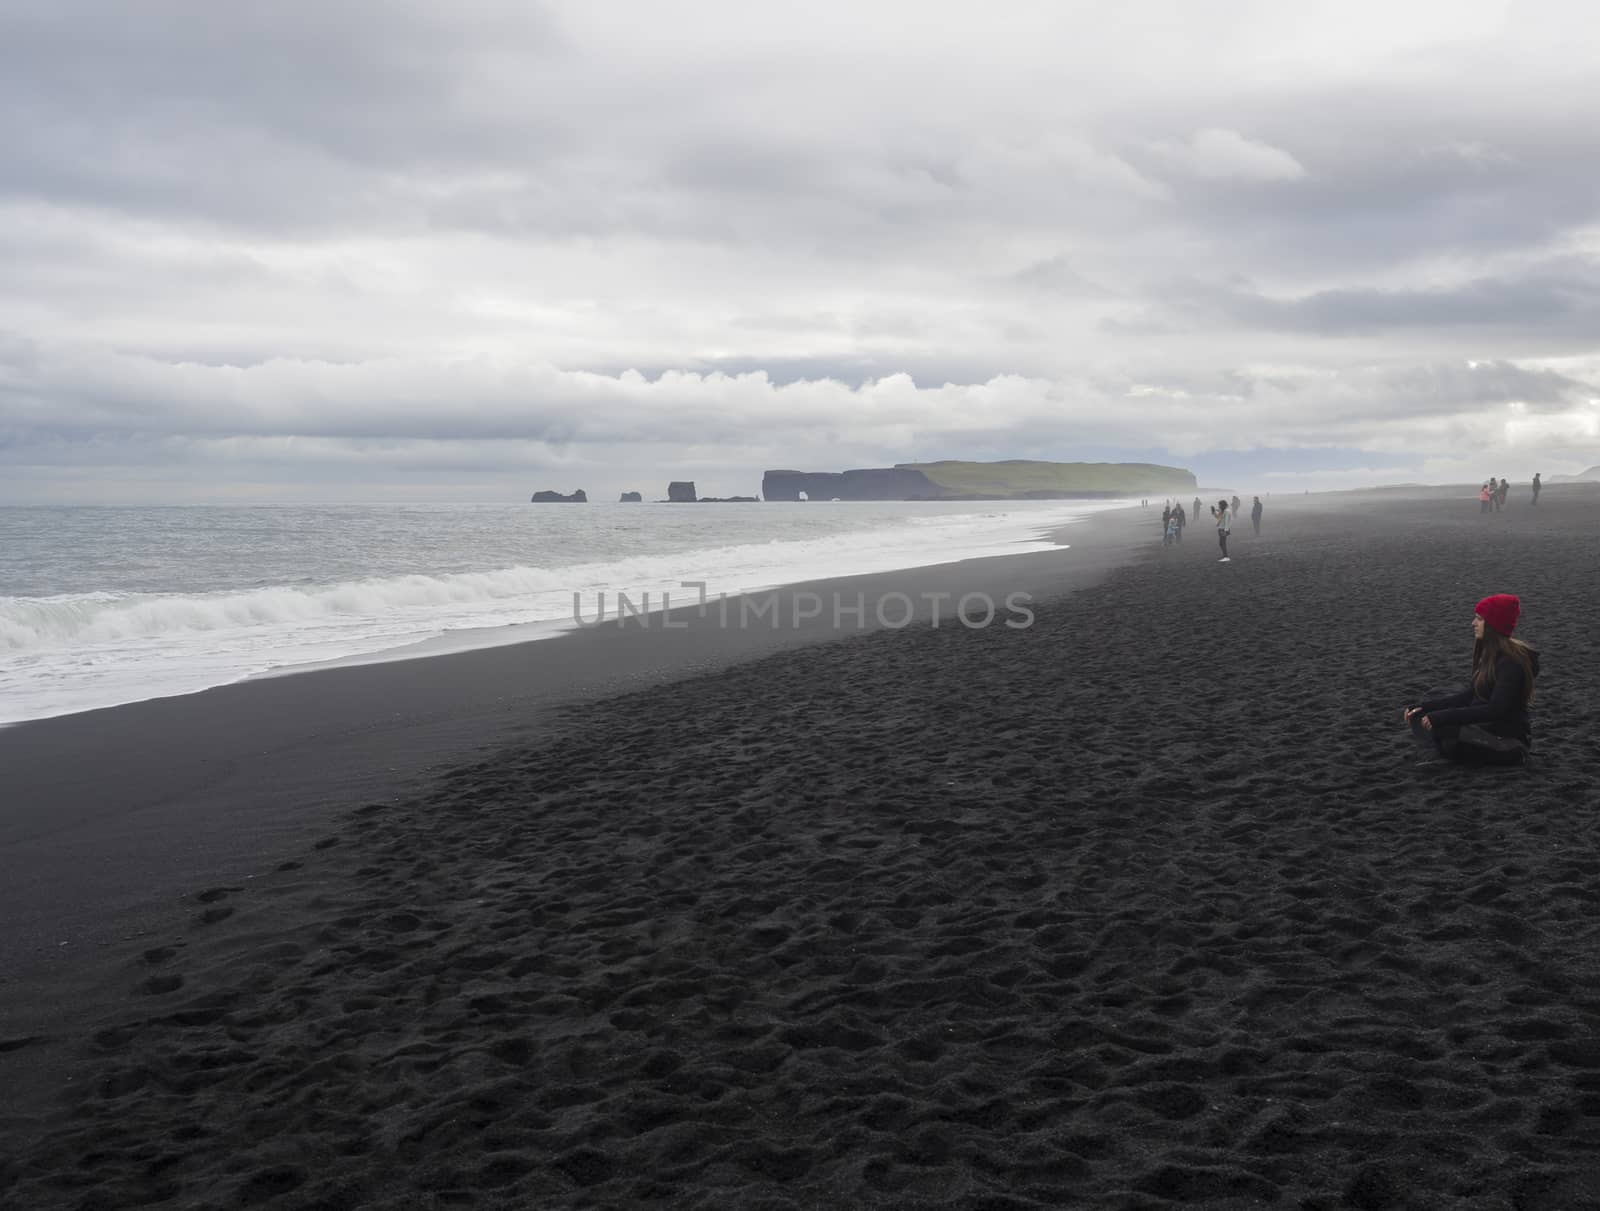 South Iceland, Vik i Myrdal, July 4, 2018: Young pretty woman in red hat sitting meditating or relaxing on Reynisfjara black sand beach, Dyrholaey rock and group of tourist people in backgrund, fog and moody sky, monochromatic look